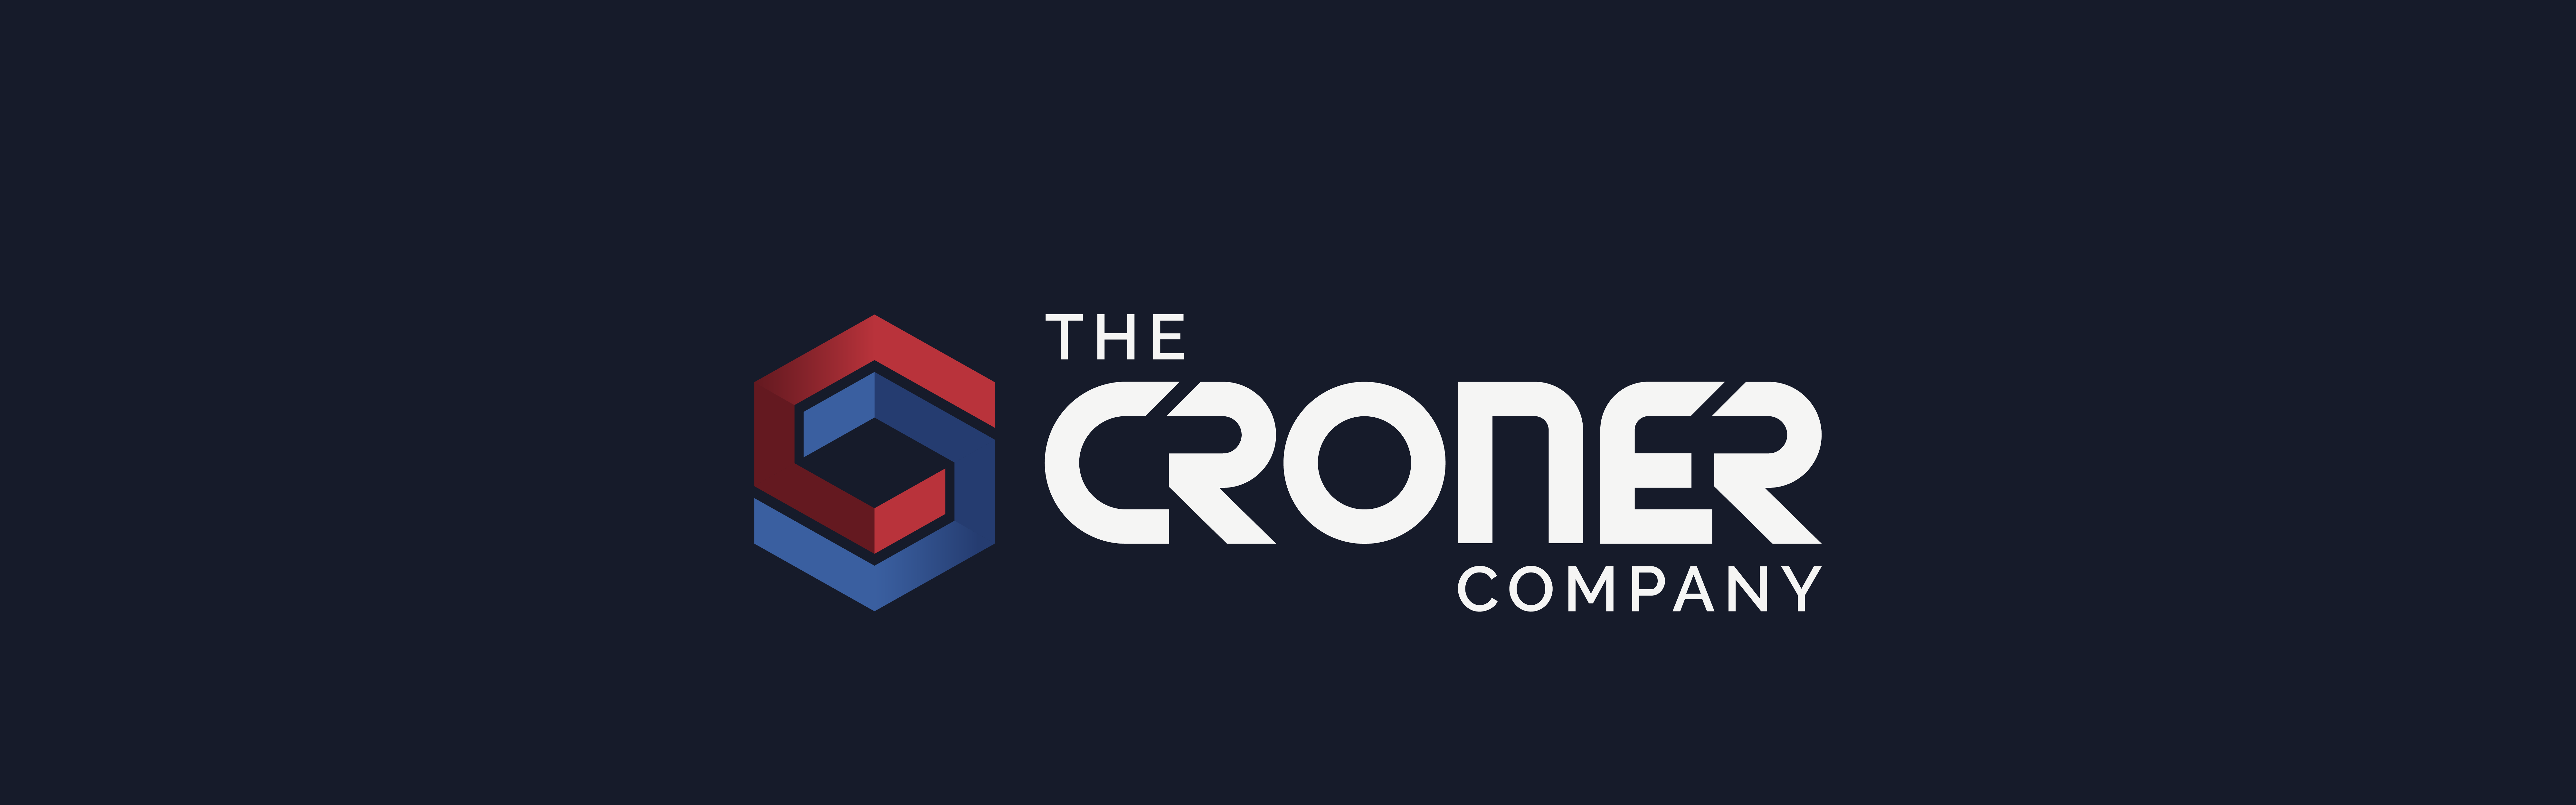 Logo of The Croner Company featuring a stylized letter 'c' in red and blue colors.